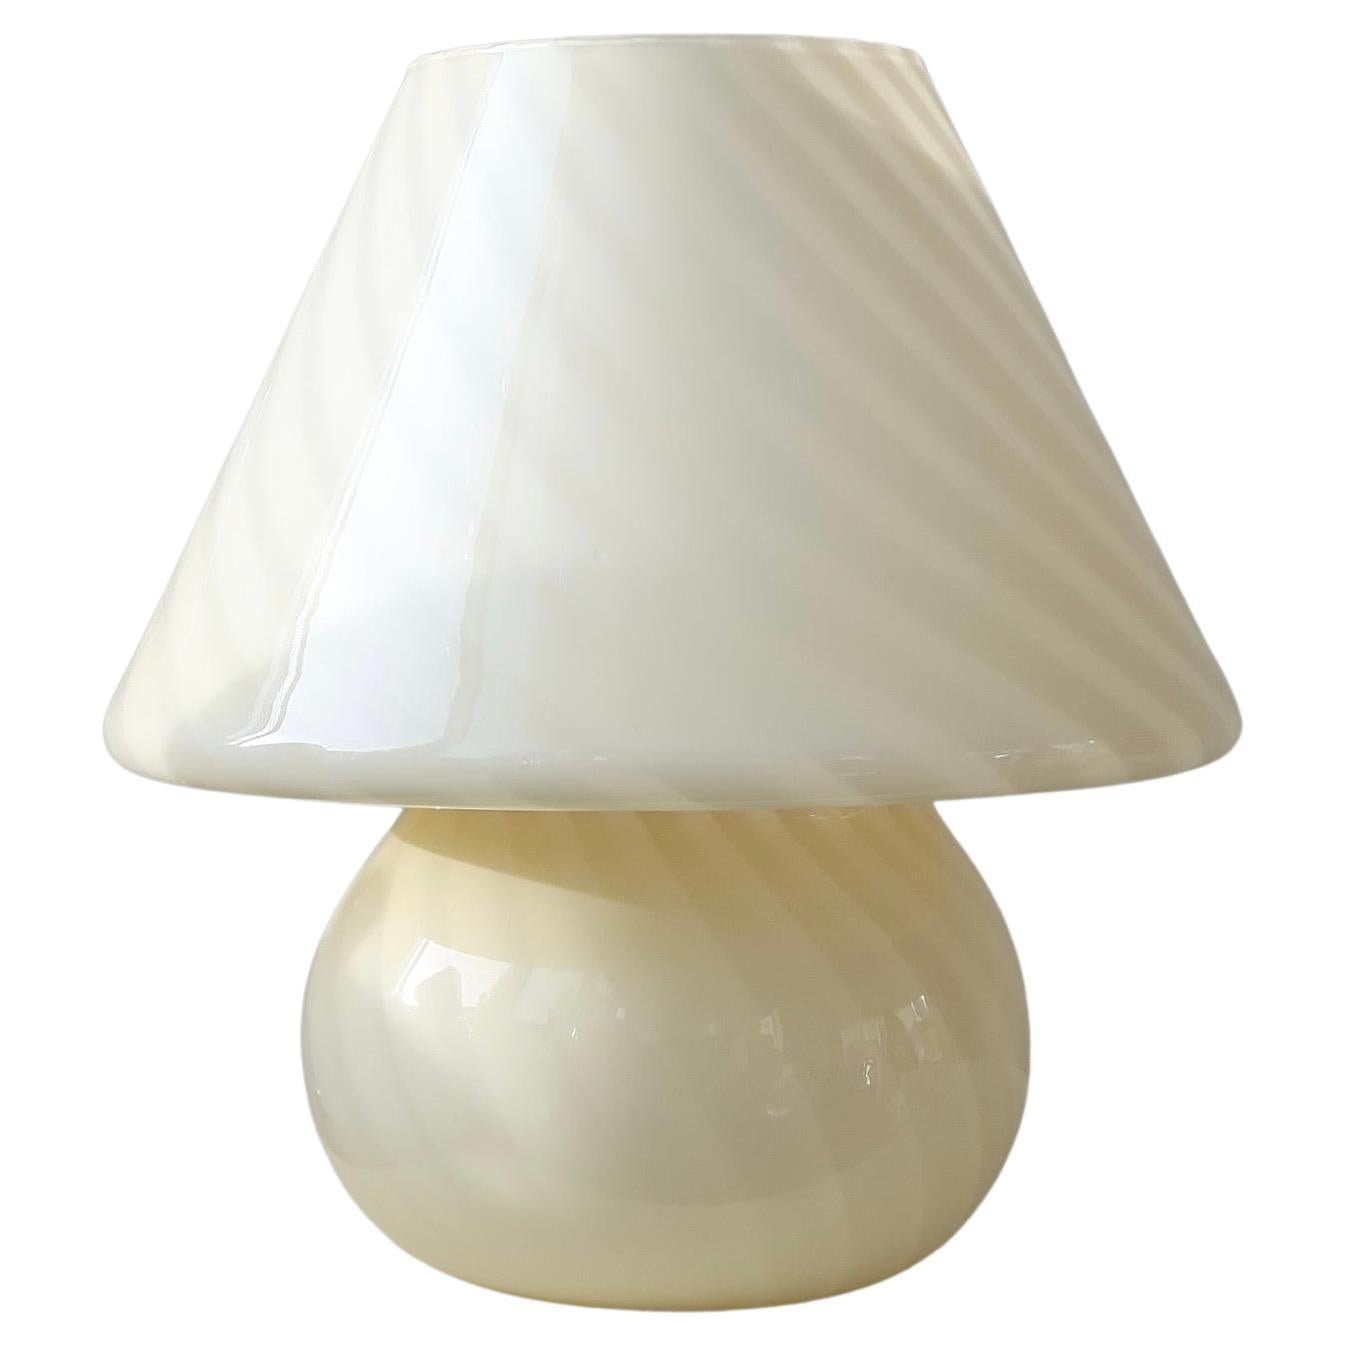 Extra large vintage Murano mushroom lamp with swirl. Mouth blown in it in a nice delicate yellow shade. Handmade in Italy, 1970s, and comes with new white cord. ??H:40 cm D:36 cm.

